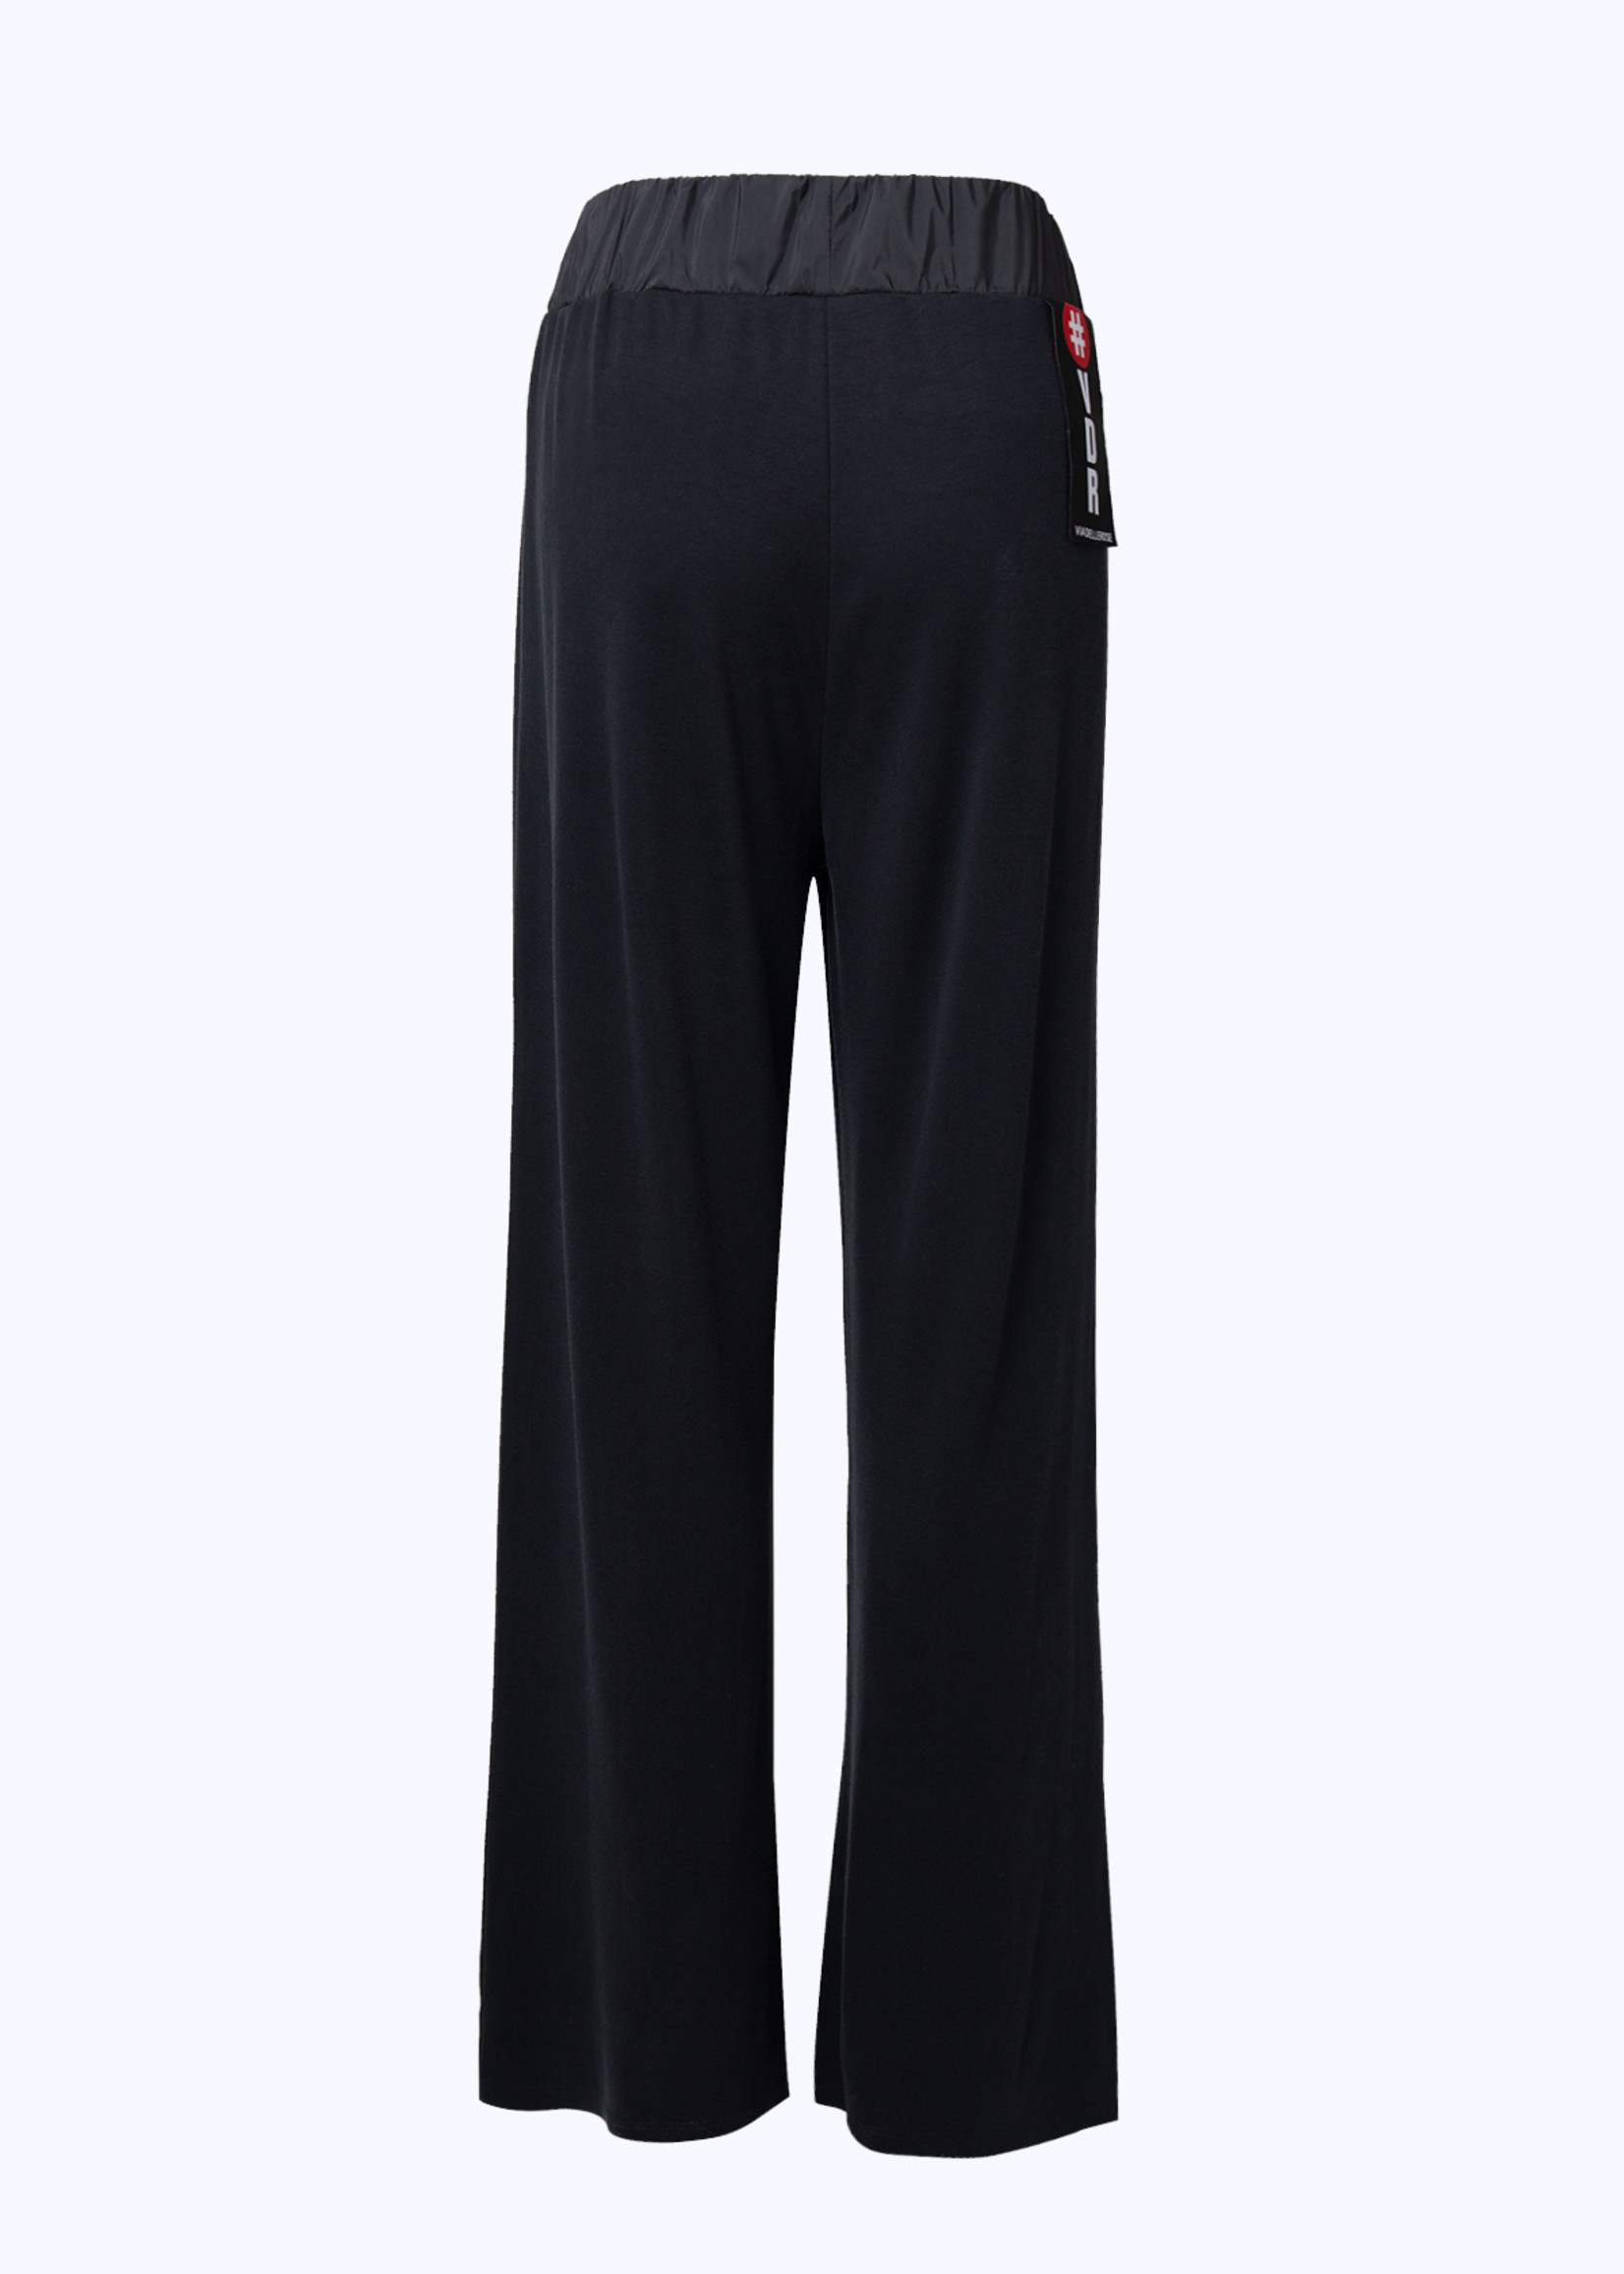 VDR RELAXED SWEATPANTS 9371